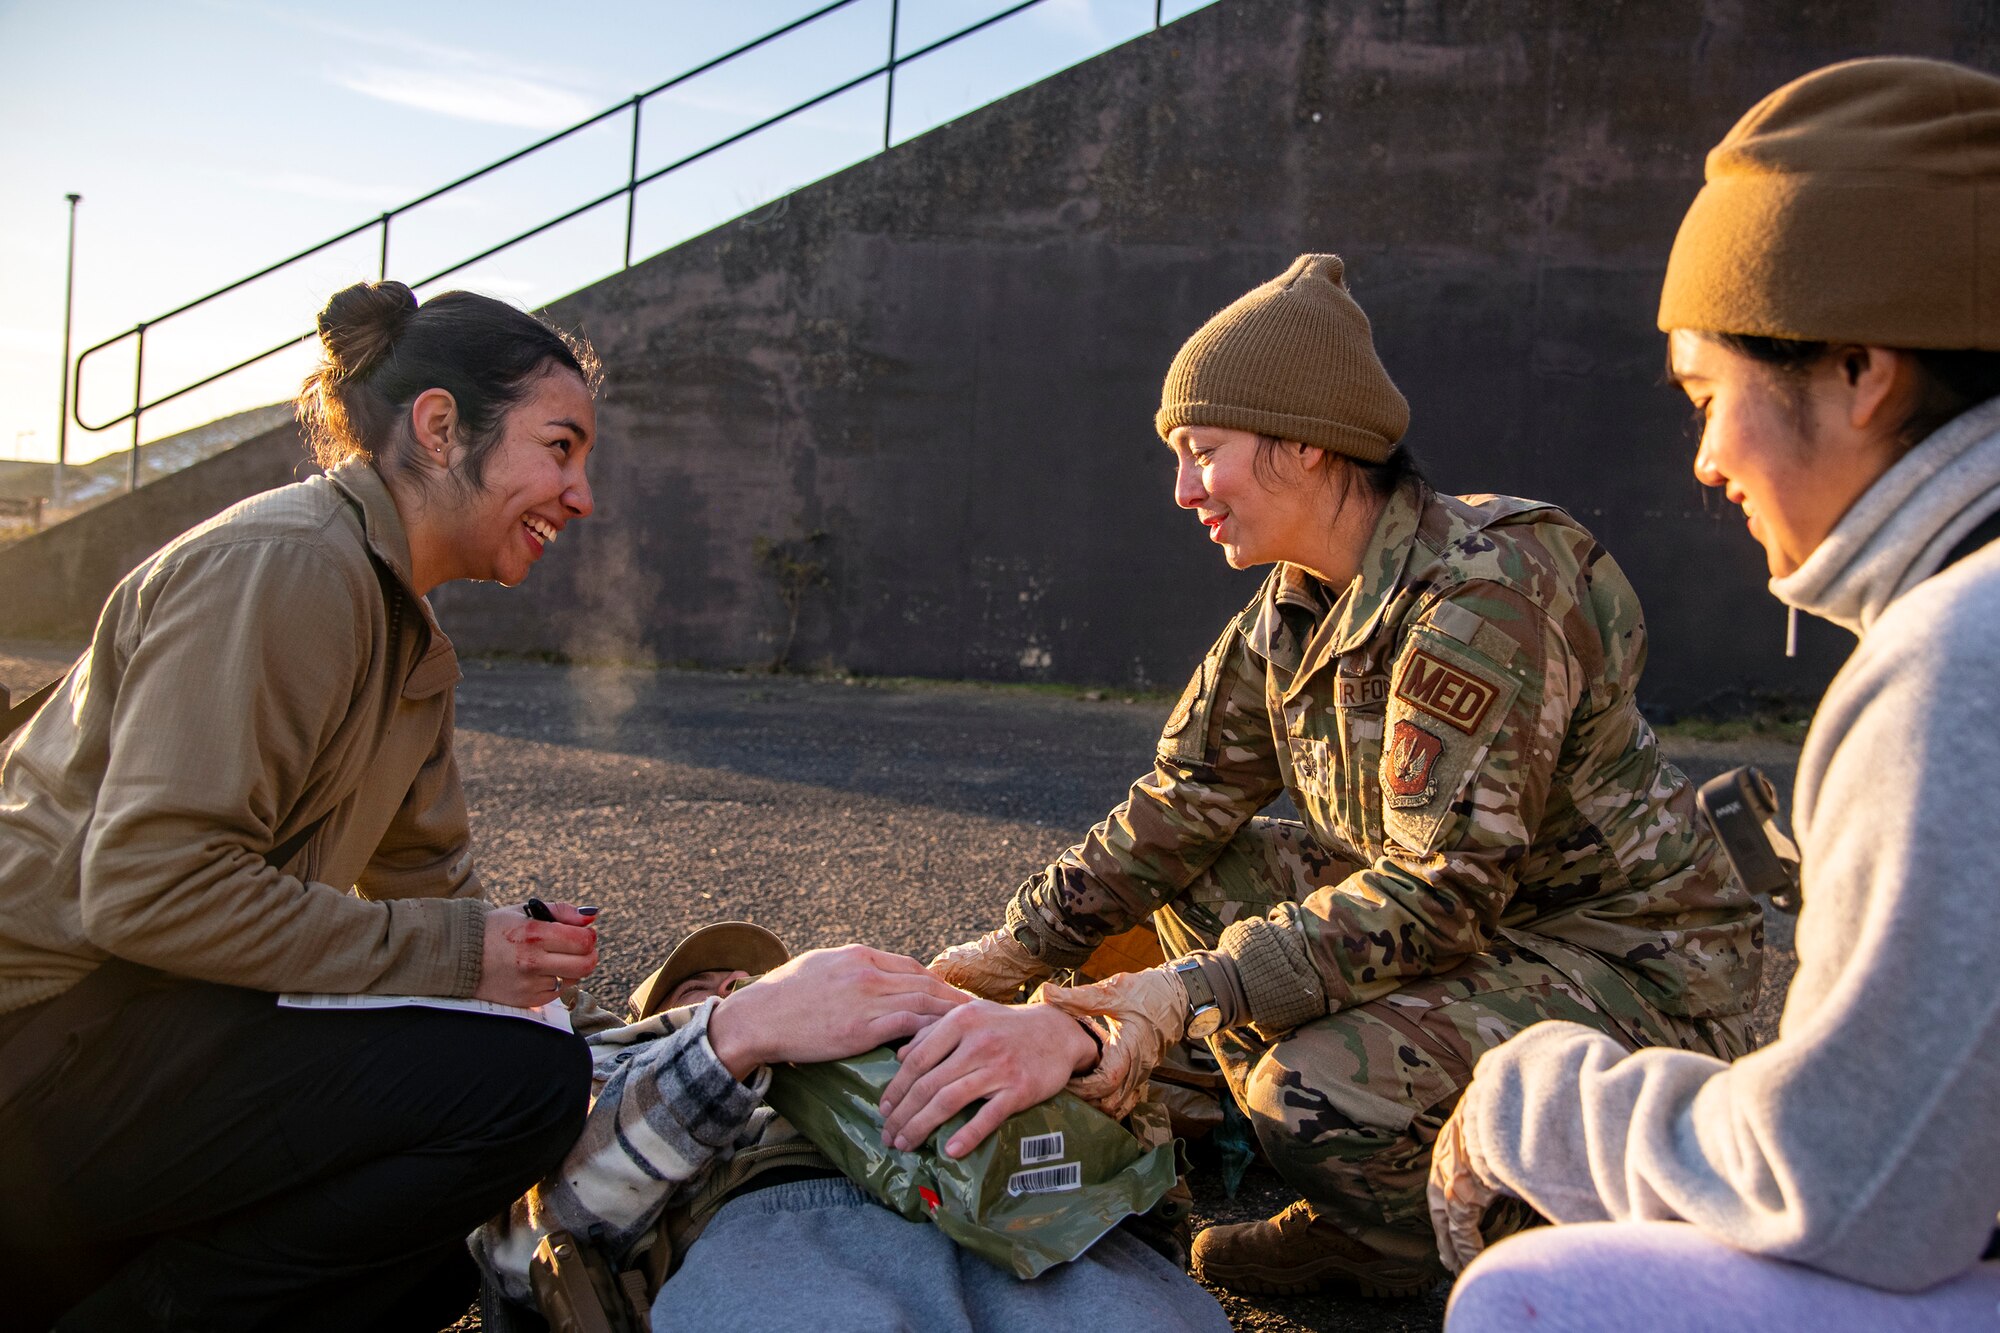 Airmen from the 423d Medical Squadron apply tactical combat casualty care to a simulated victim during an active shooter exercise at RAF Molesworth, England, Dec. 16, 2022. The 423d MDS and Security Forces Squadrons conducted the exercise to evaluate their overall readiness and response capabilities to an emergency situation. (U.S. Air Force photo by Staff Sgt. Eugene Oliver)